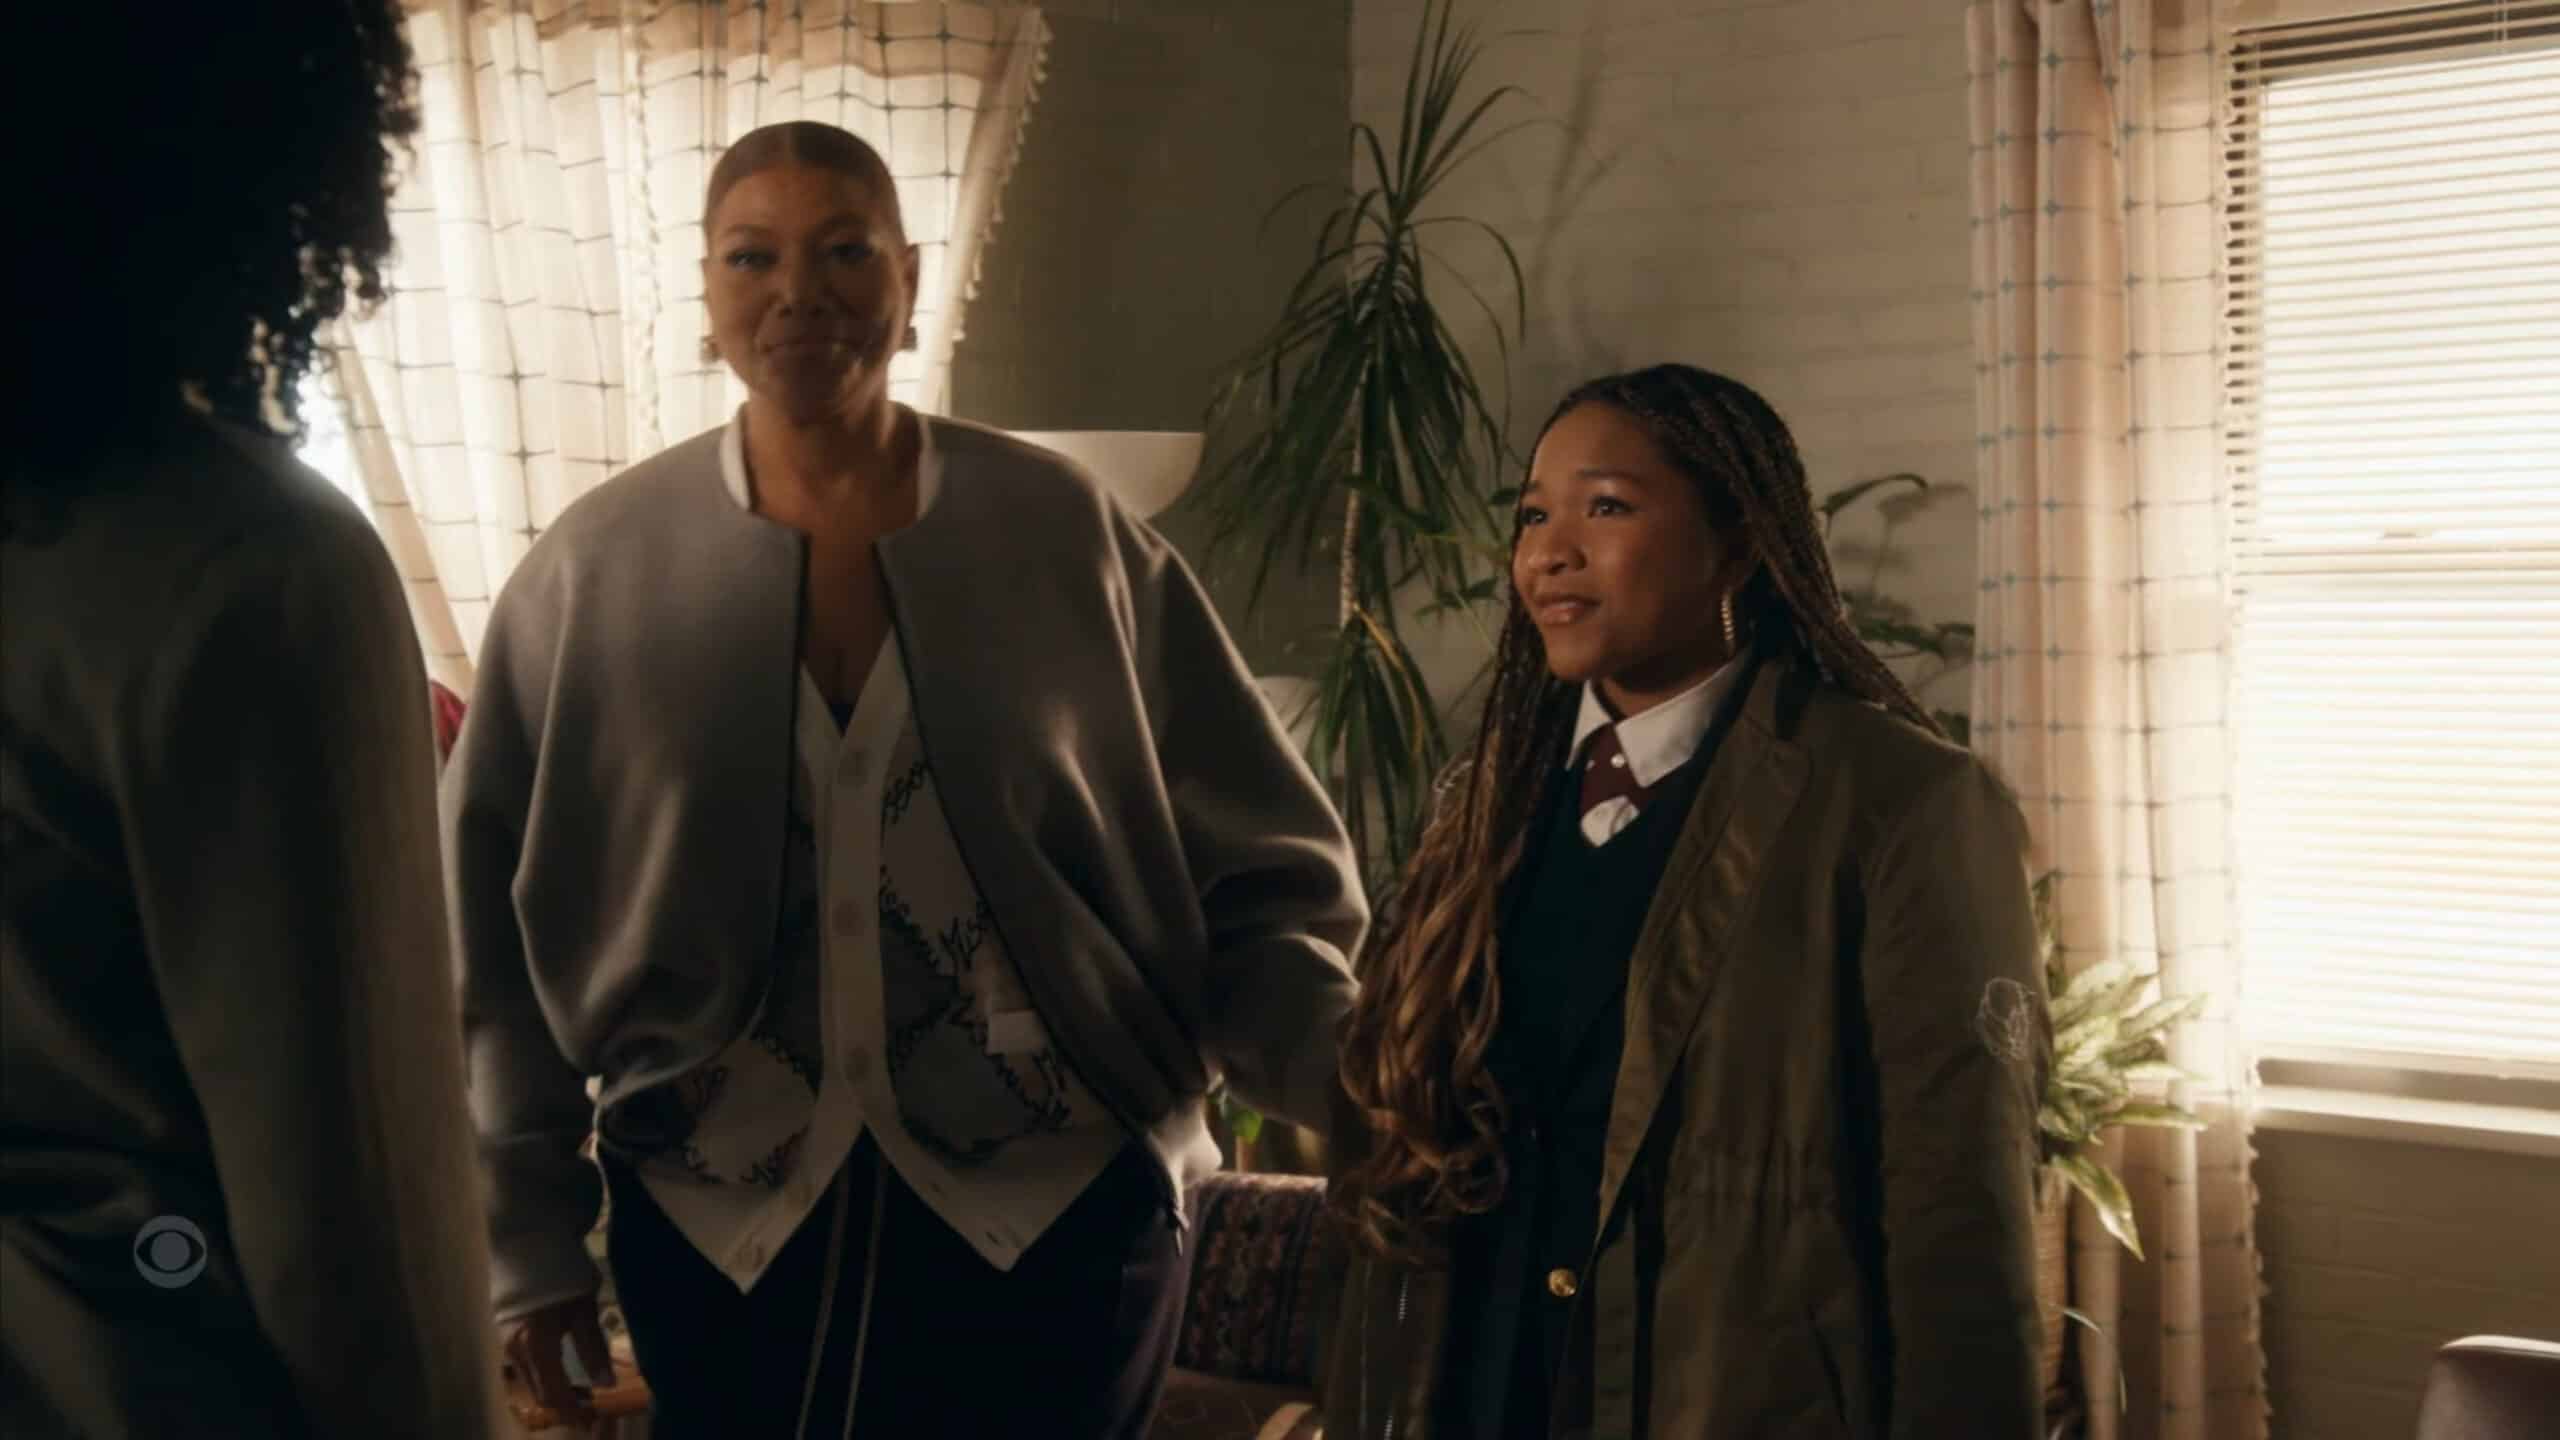 Queen Latifah as Robyn and Laya DeLeon Hayes as Delilah